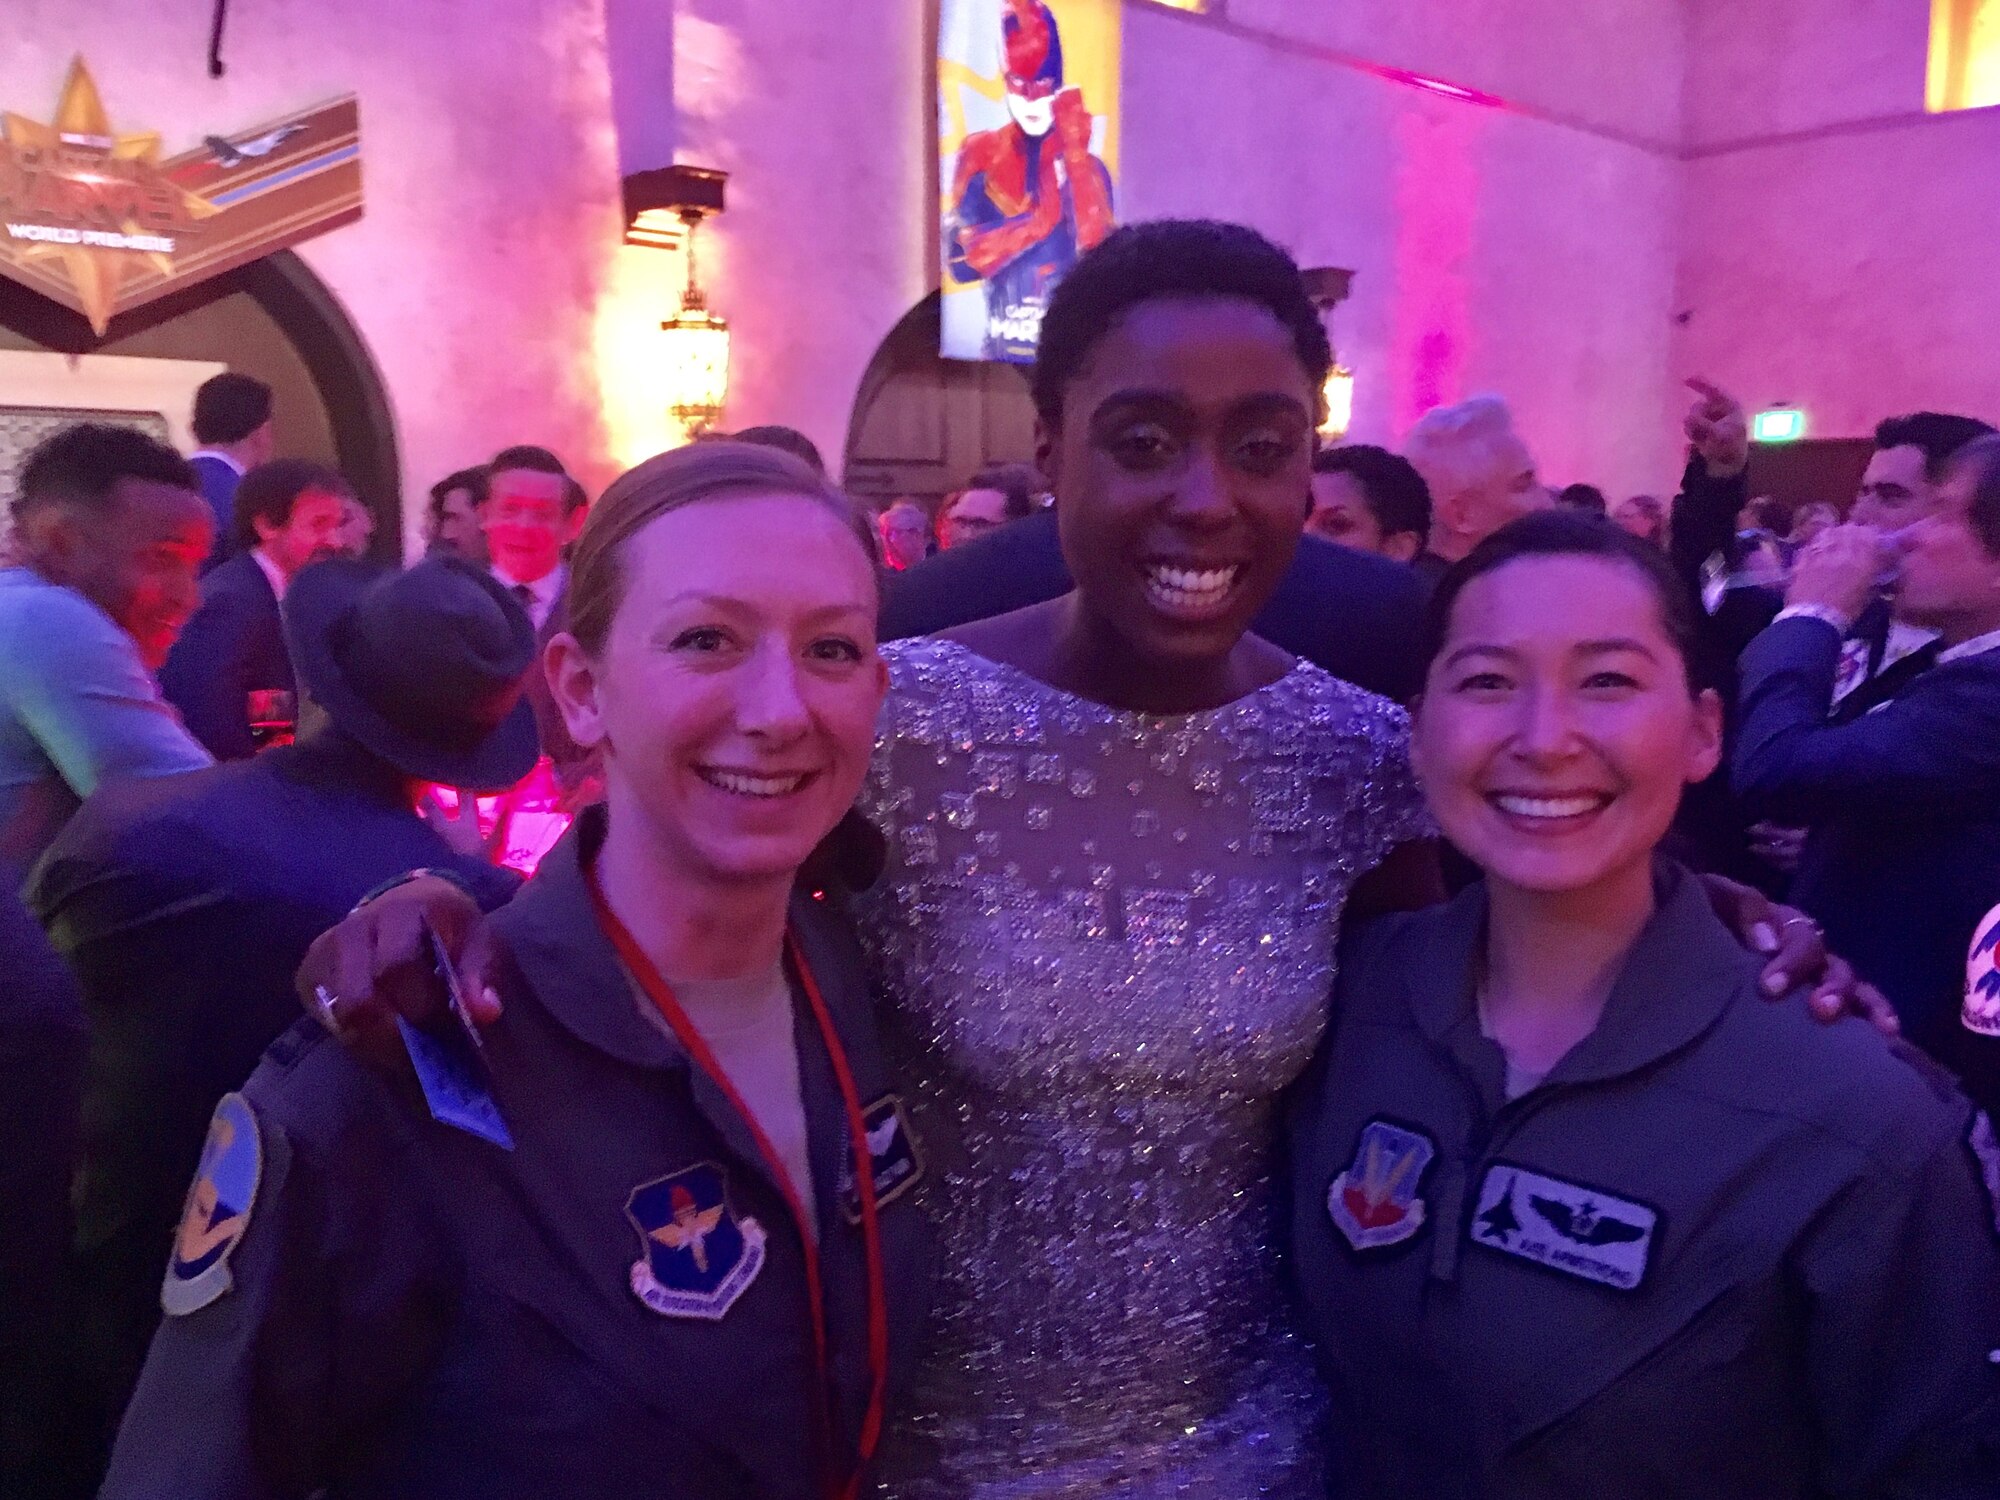 Capt. Danielle Park (left), 311th Fighter Squadron instructor pilot, stands next to Lashana Lynch (middle), who plays Maria Rambeau in Captain Marval, while at the premiere of the film in Los Angeles, Calif, March 4, 2019. Park was invited to attend the premiere of Captain Marval after giving the actress, Brie Larson, a ride in an F-16 Fighting Falcon while stationed at Nellis Air Force Base, Nev. (Courtesy photo)